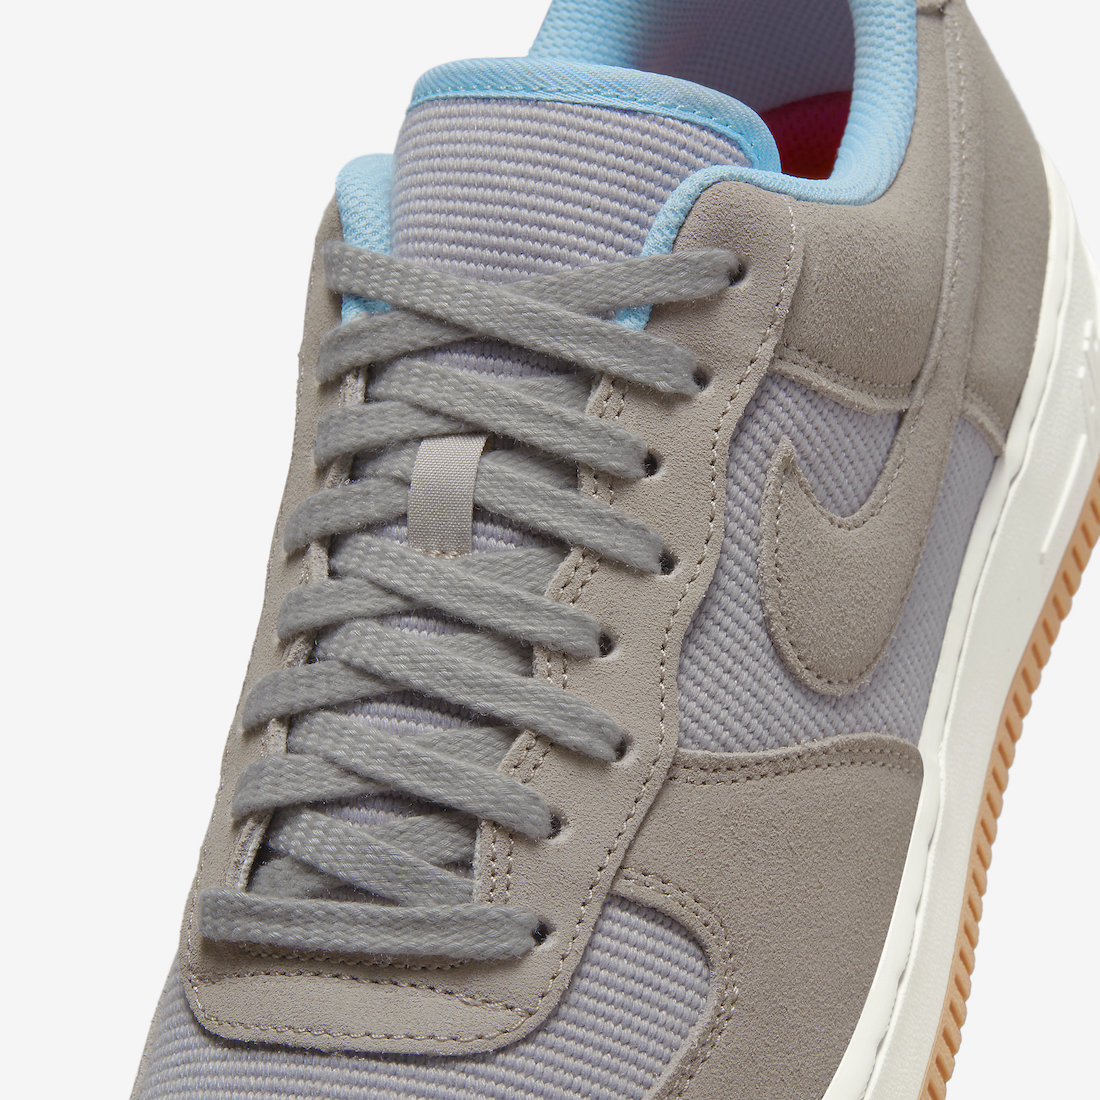 Nike Air Force 1 Low Shroud DH7578-001 Release Date